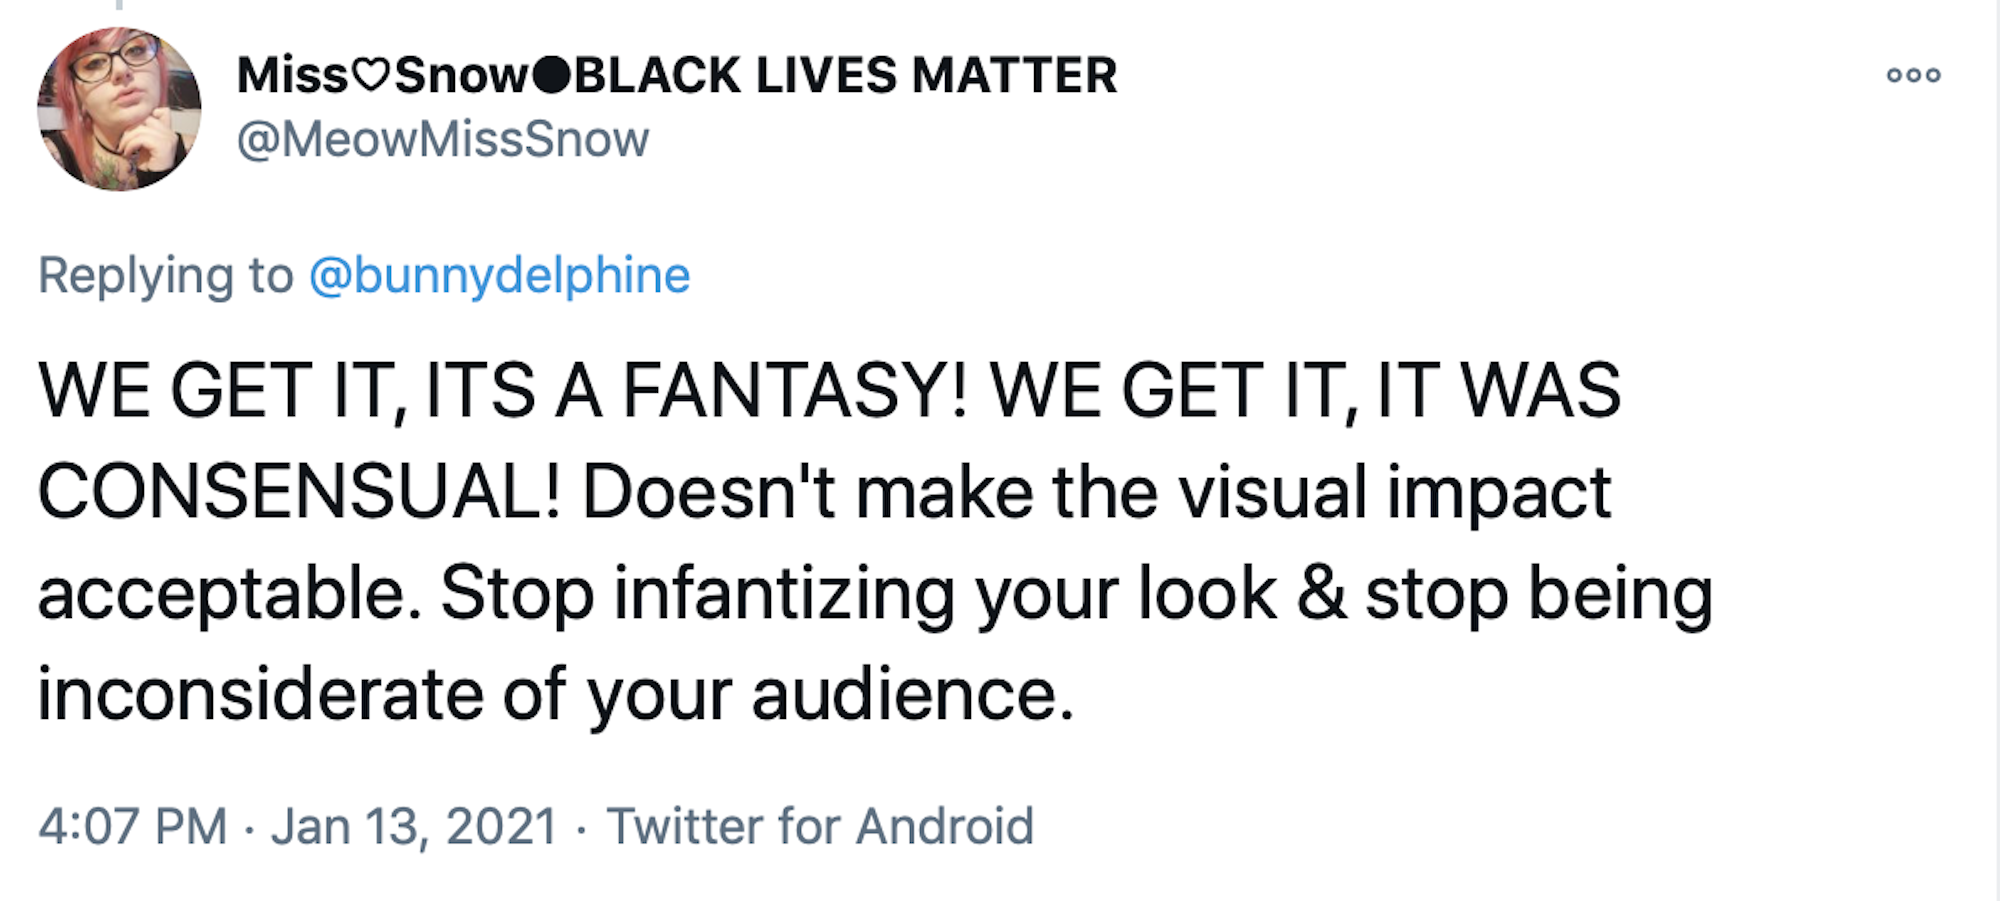 WE GET IT, ITS A FANTASY! WE GET IT, IT WAS CONSENSUAL! Doesn't make the visual impact acceptable. Stop infantizing your look & stop being inconsiderate of your audience.